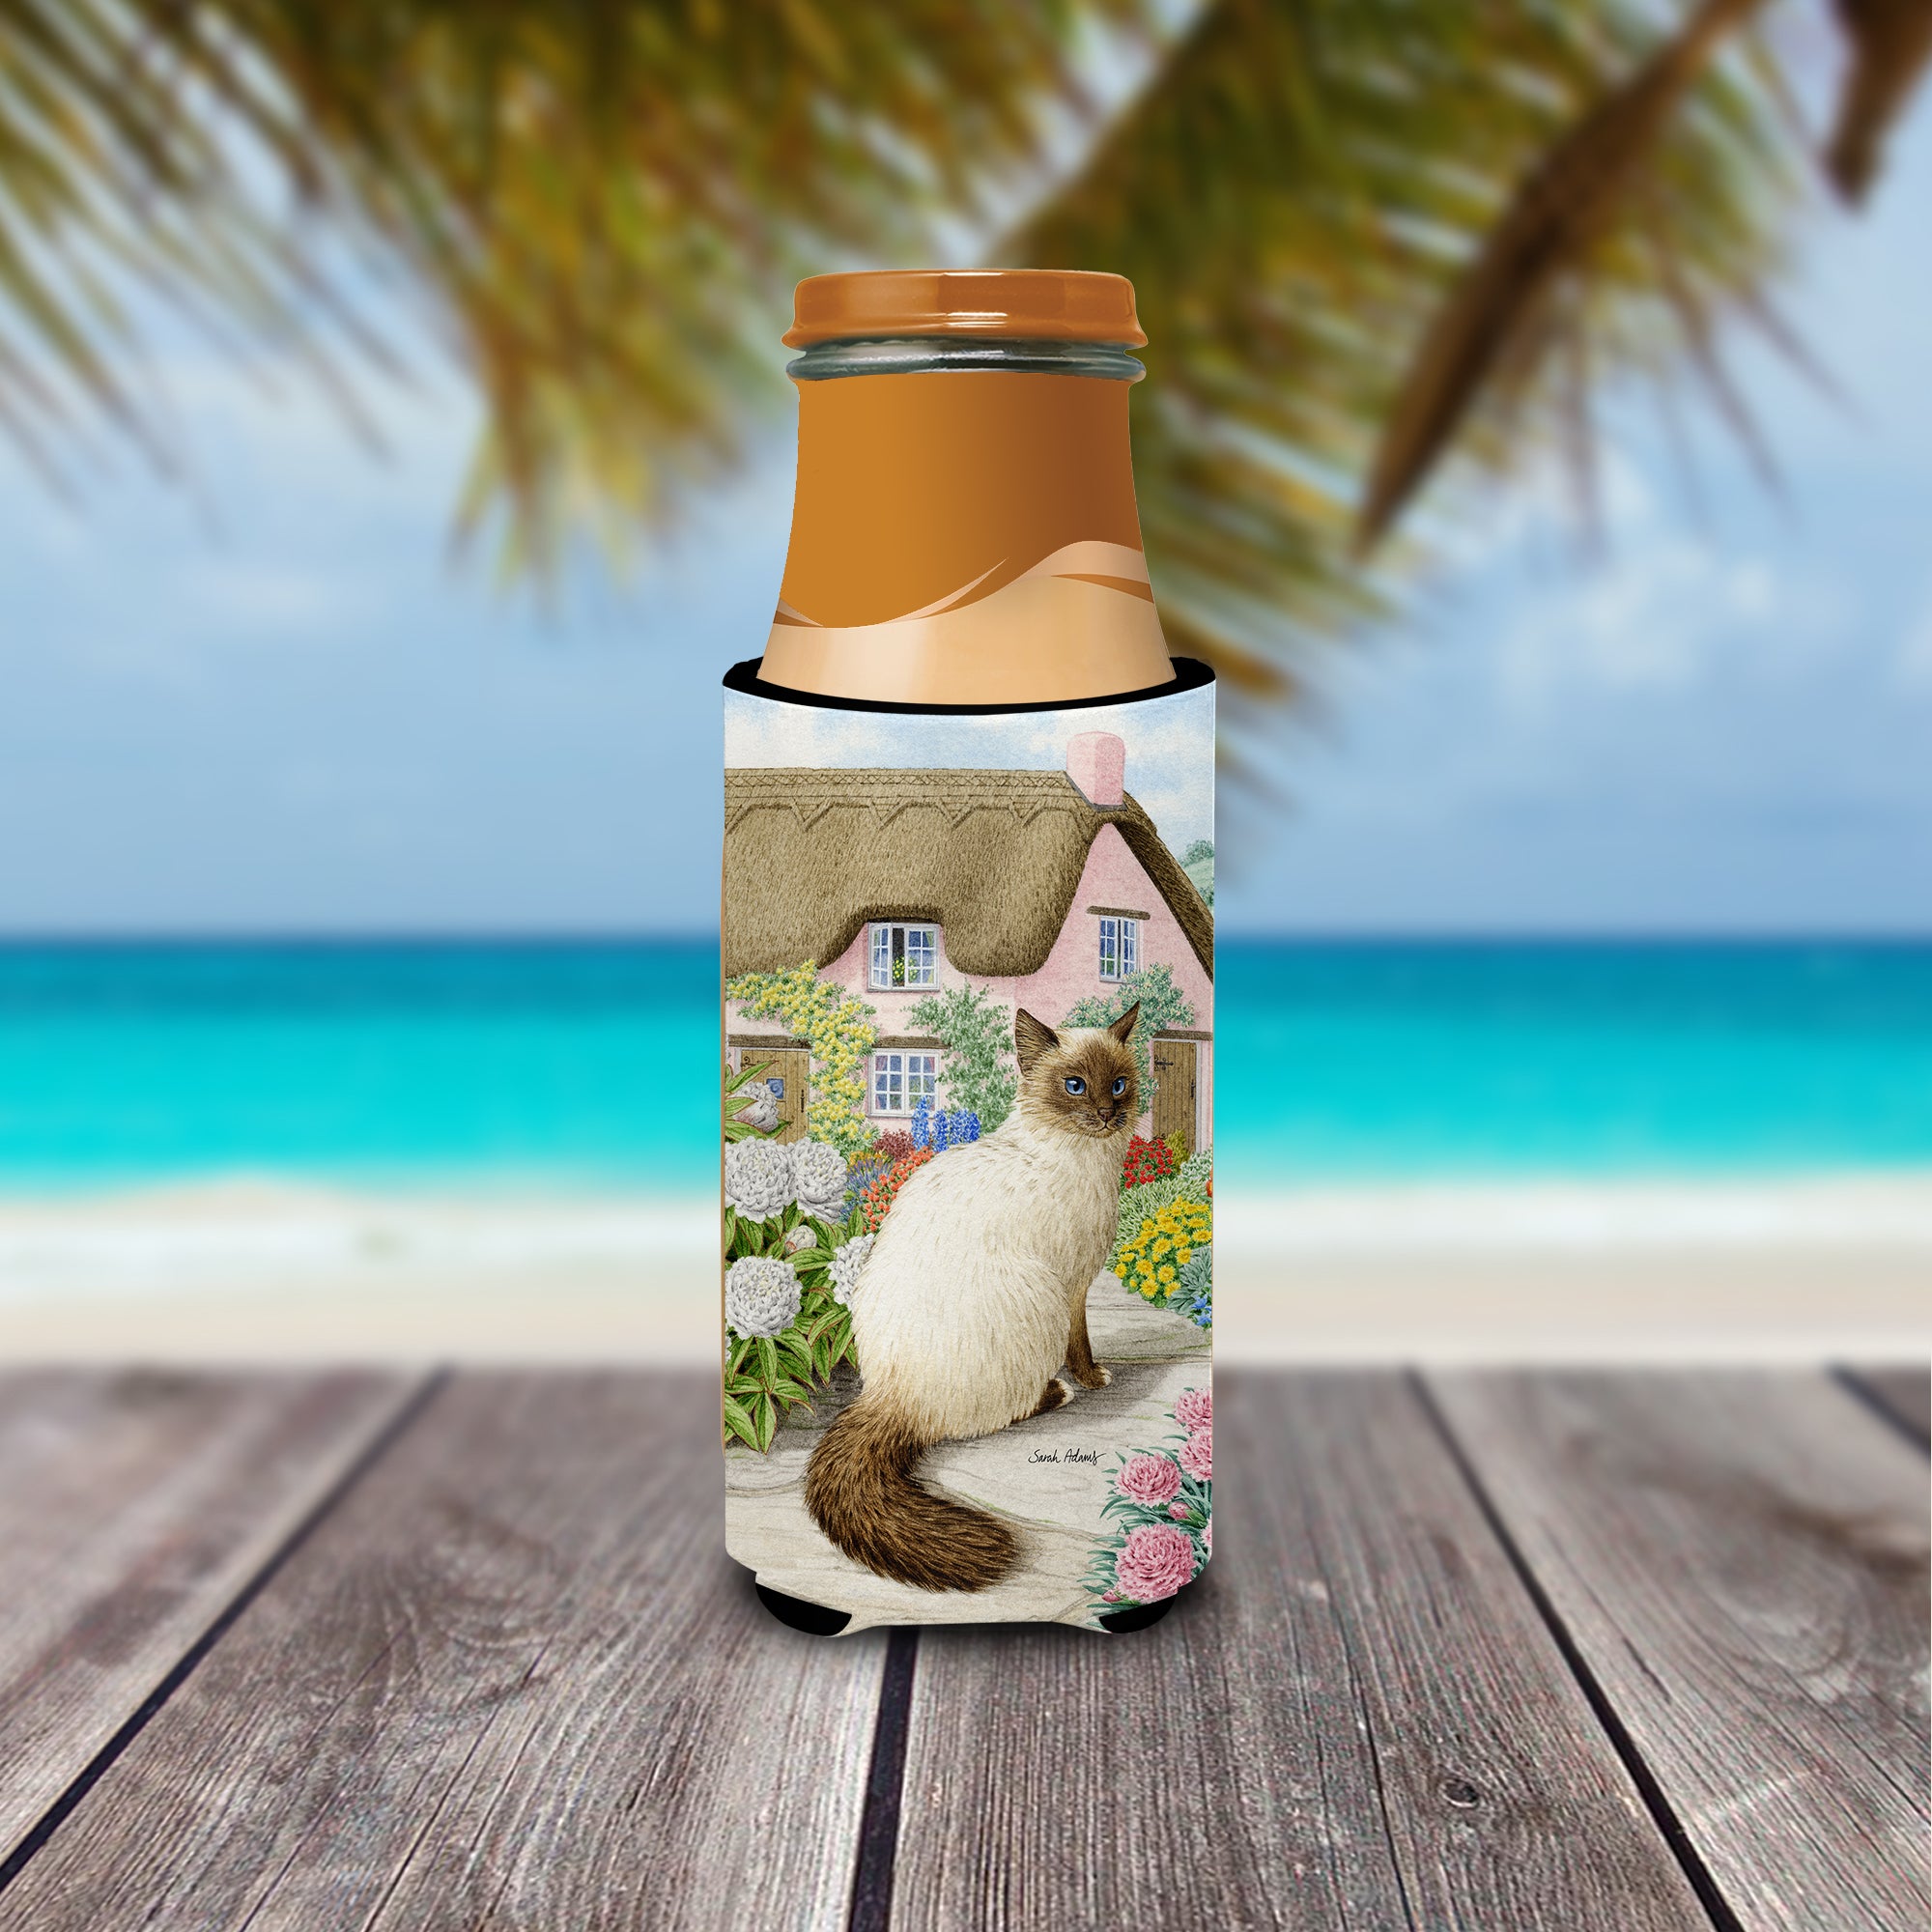 Birman Cat and Cottage Ultra Beverage Insulators for slim cans ASA2086MUK  the-store.com.